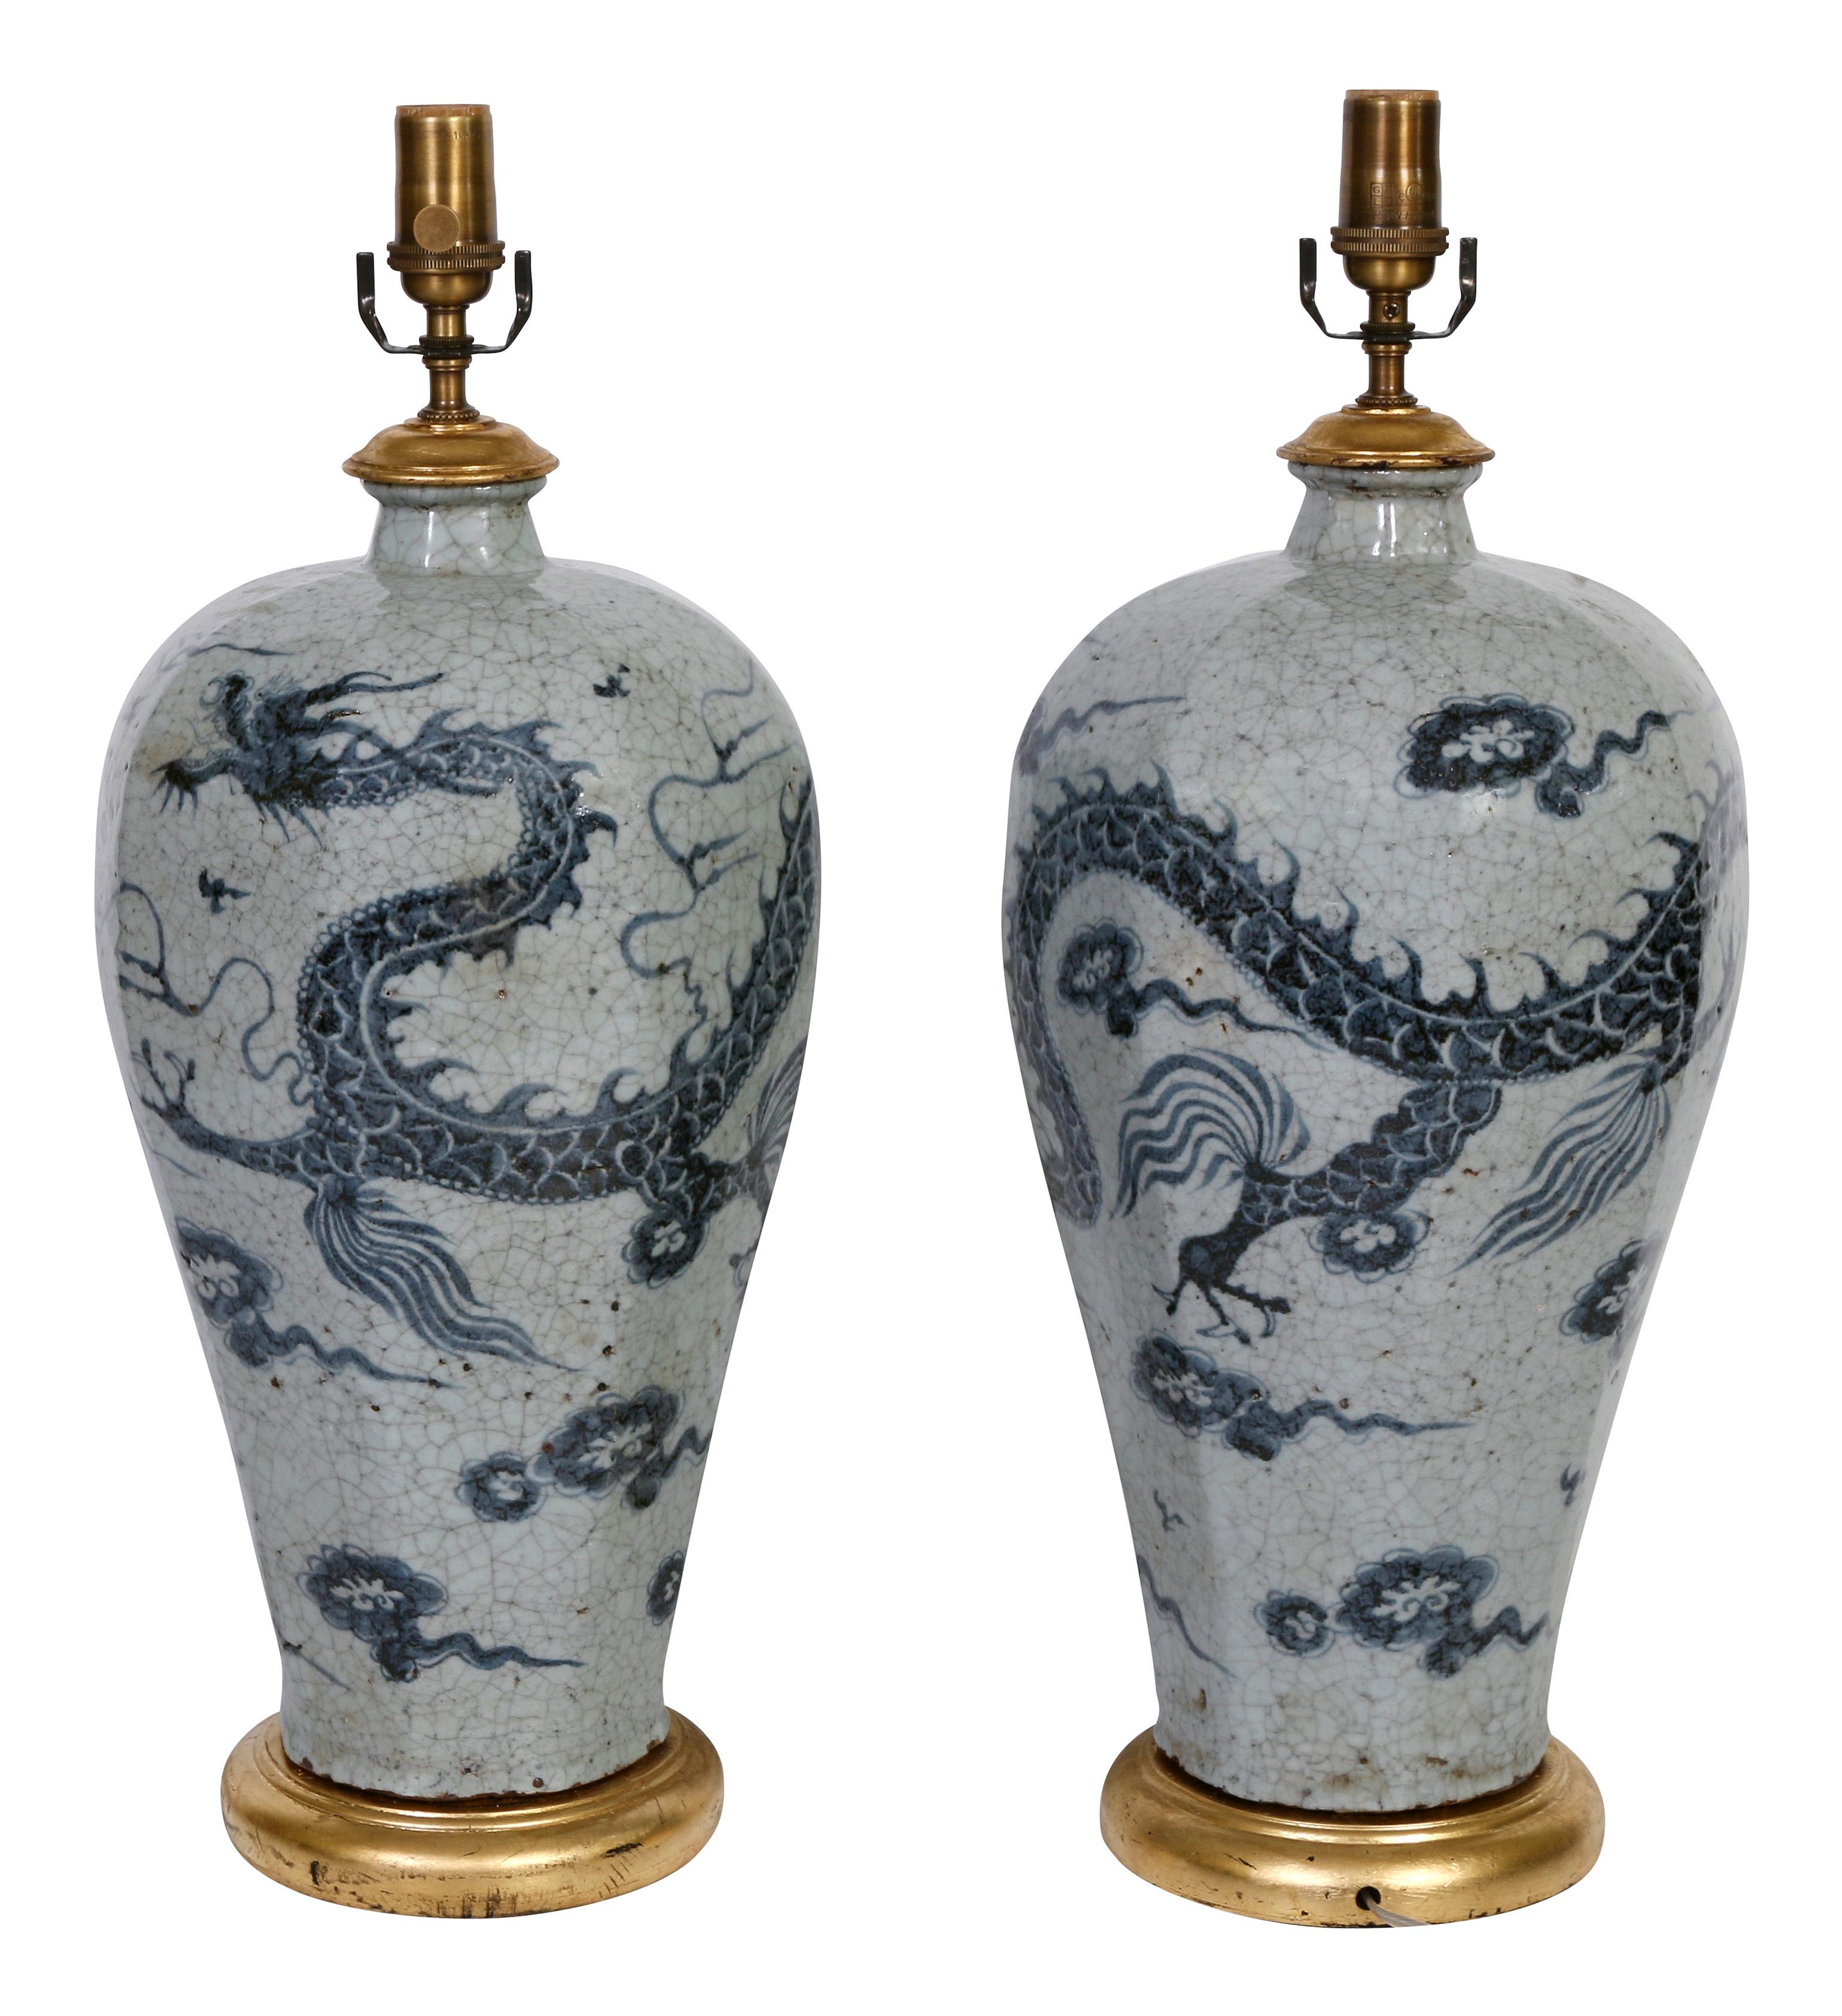 A great looking pair of Chinese export lamps in a blue/gray. crackle glaze with a dragon motif. The lamps are mounted on a giltwood base and are topped with off-white box-pleated shades.